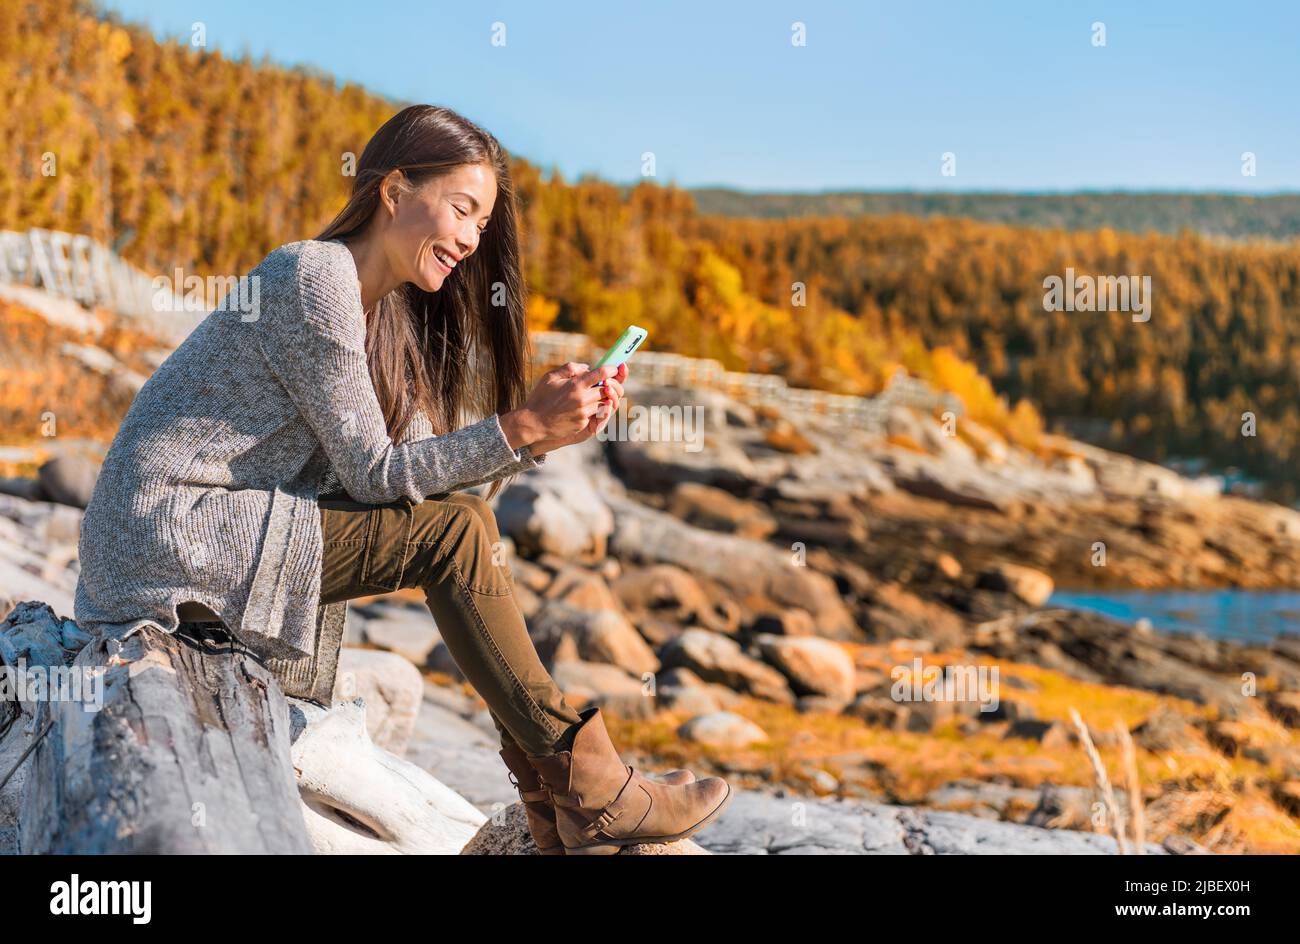 Mobile phone travel lifestyle Asian woman using cellphone data durig outdoor hiking adventure in Quebec, Canada. Happy girl texting in forest autumn Stock Photo